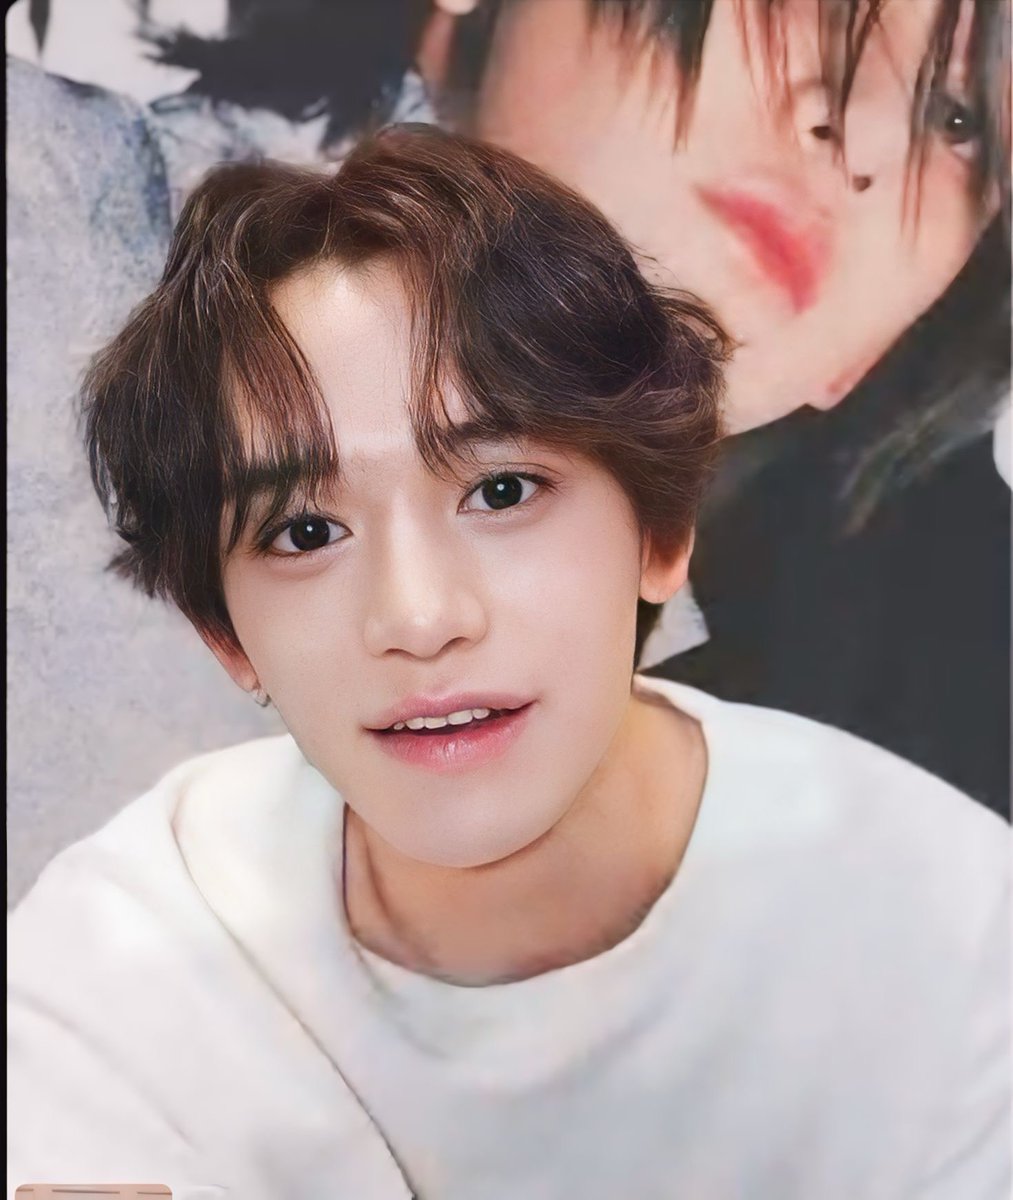 Good morning Lucas & Lumis 🍀

©️ to the owner